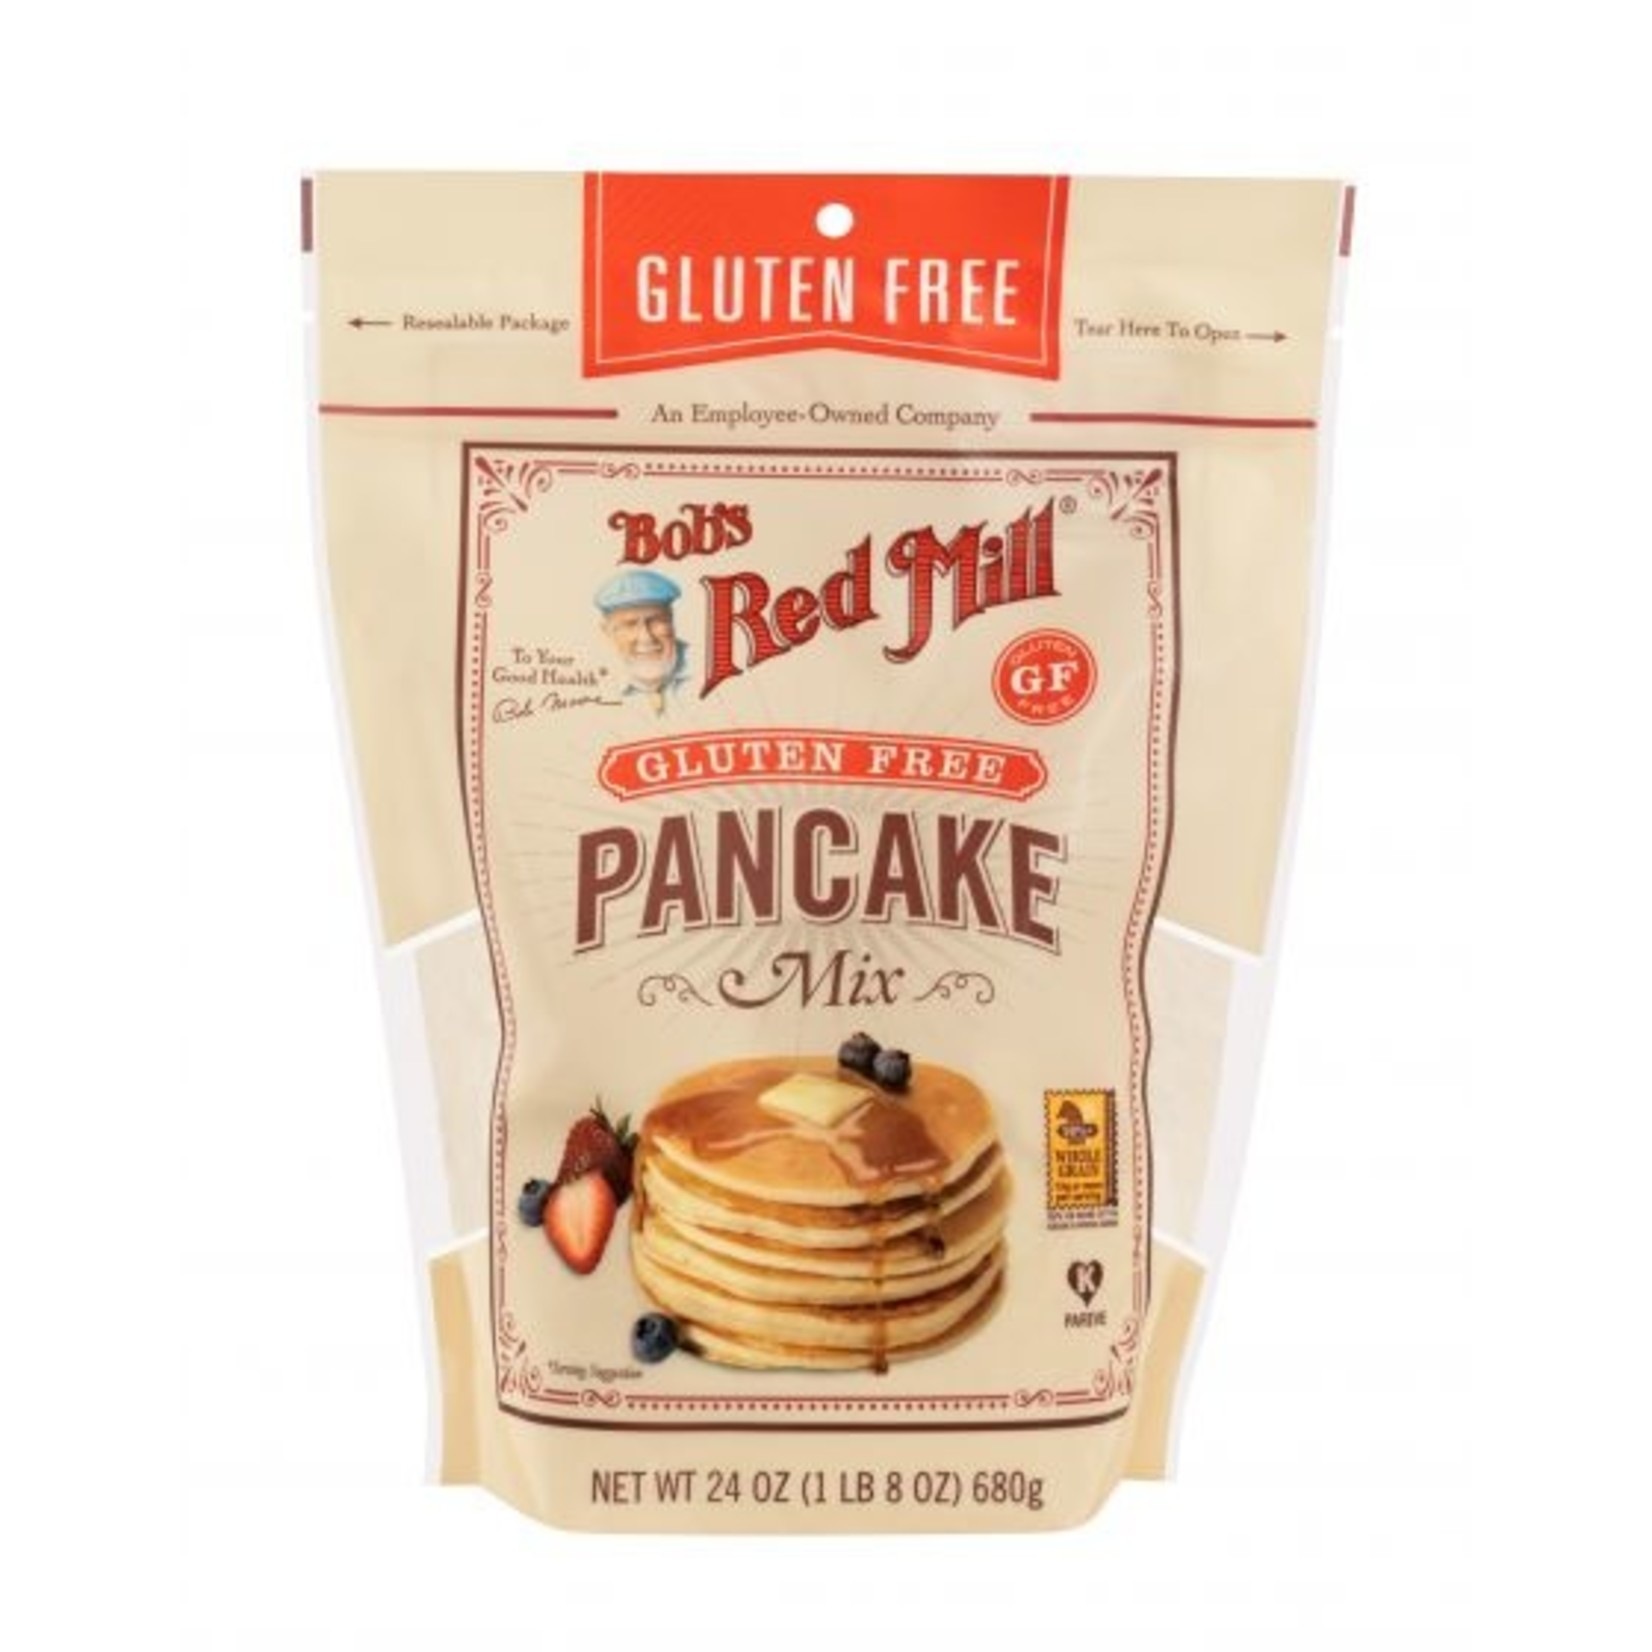 Bobs Red Mill Bobs Red Mill - Gluten Free Pancake Mix - 24 oz